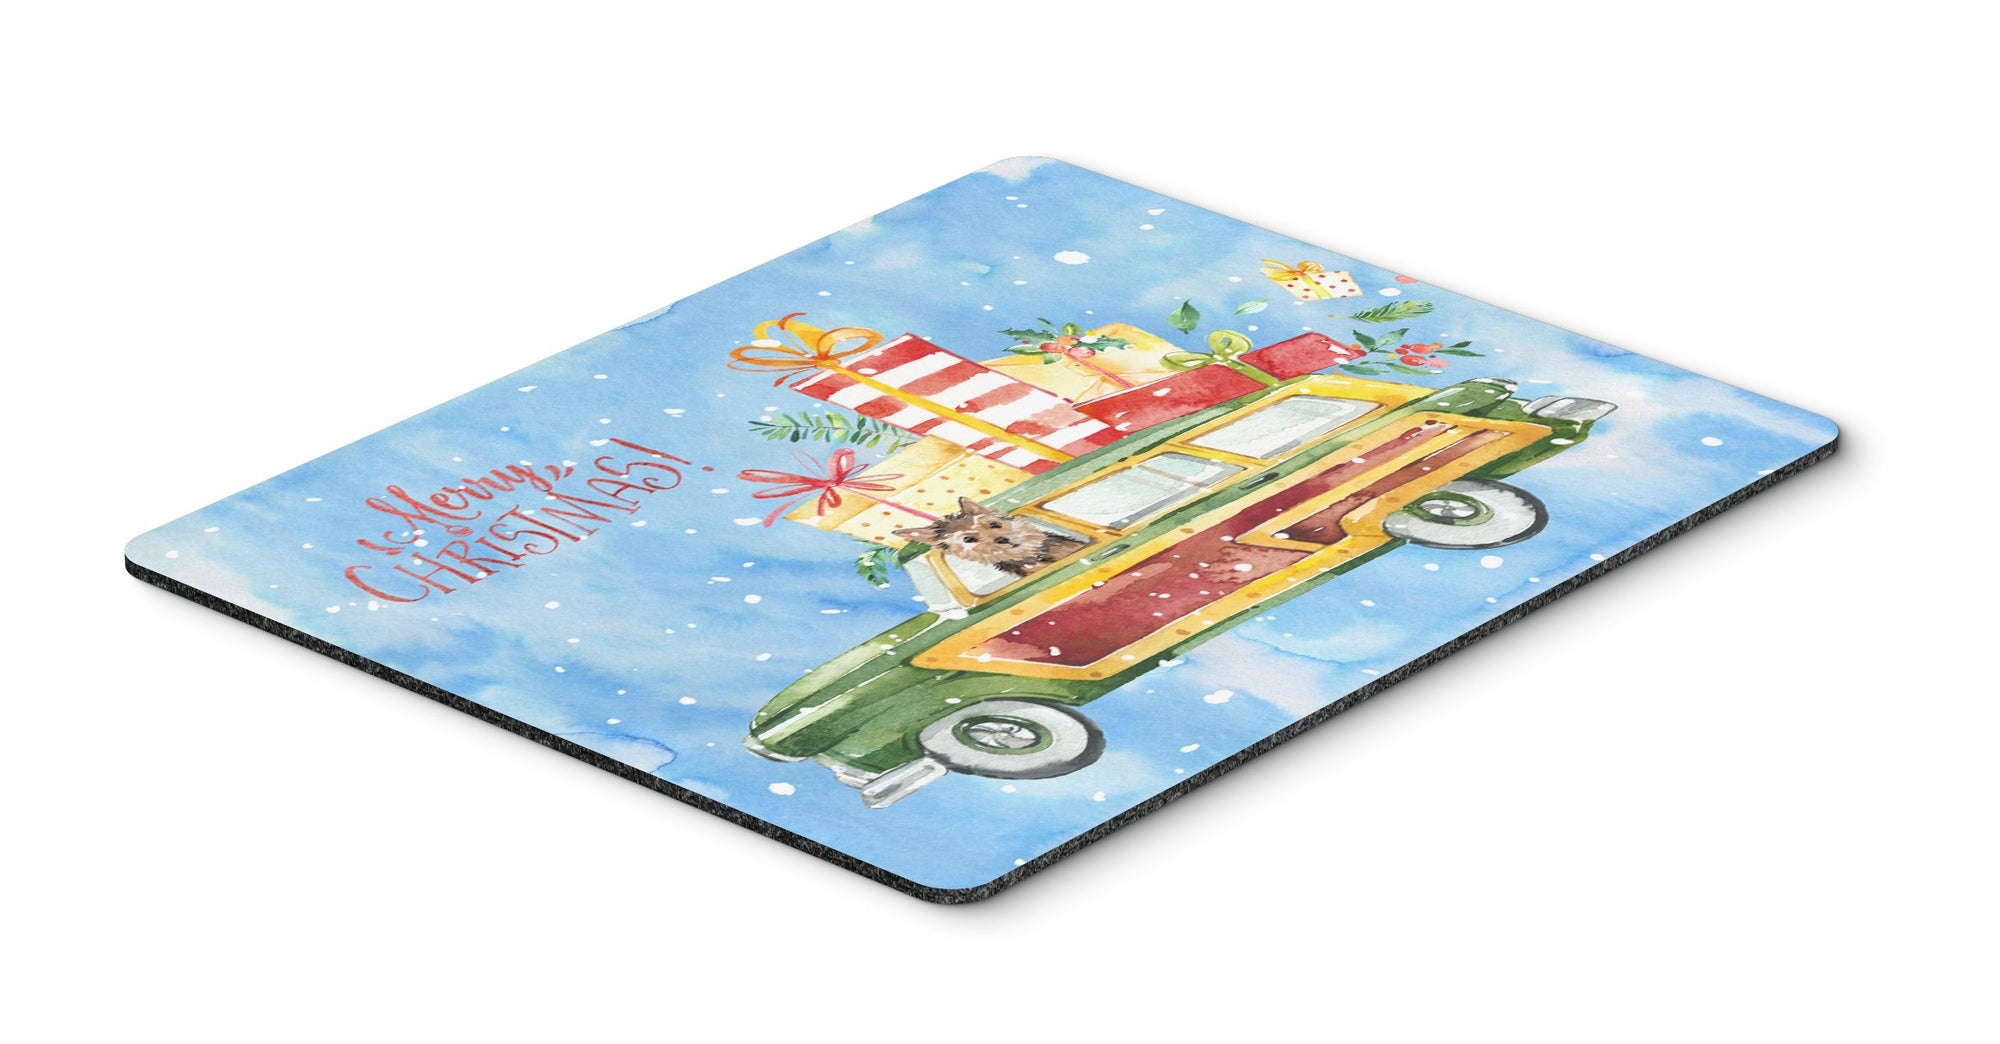 Merry Christmas Norwich Terrier Mouse Pad, Hot Pad or Trivet CK2461MP by Caroline's Treasures